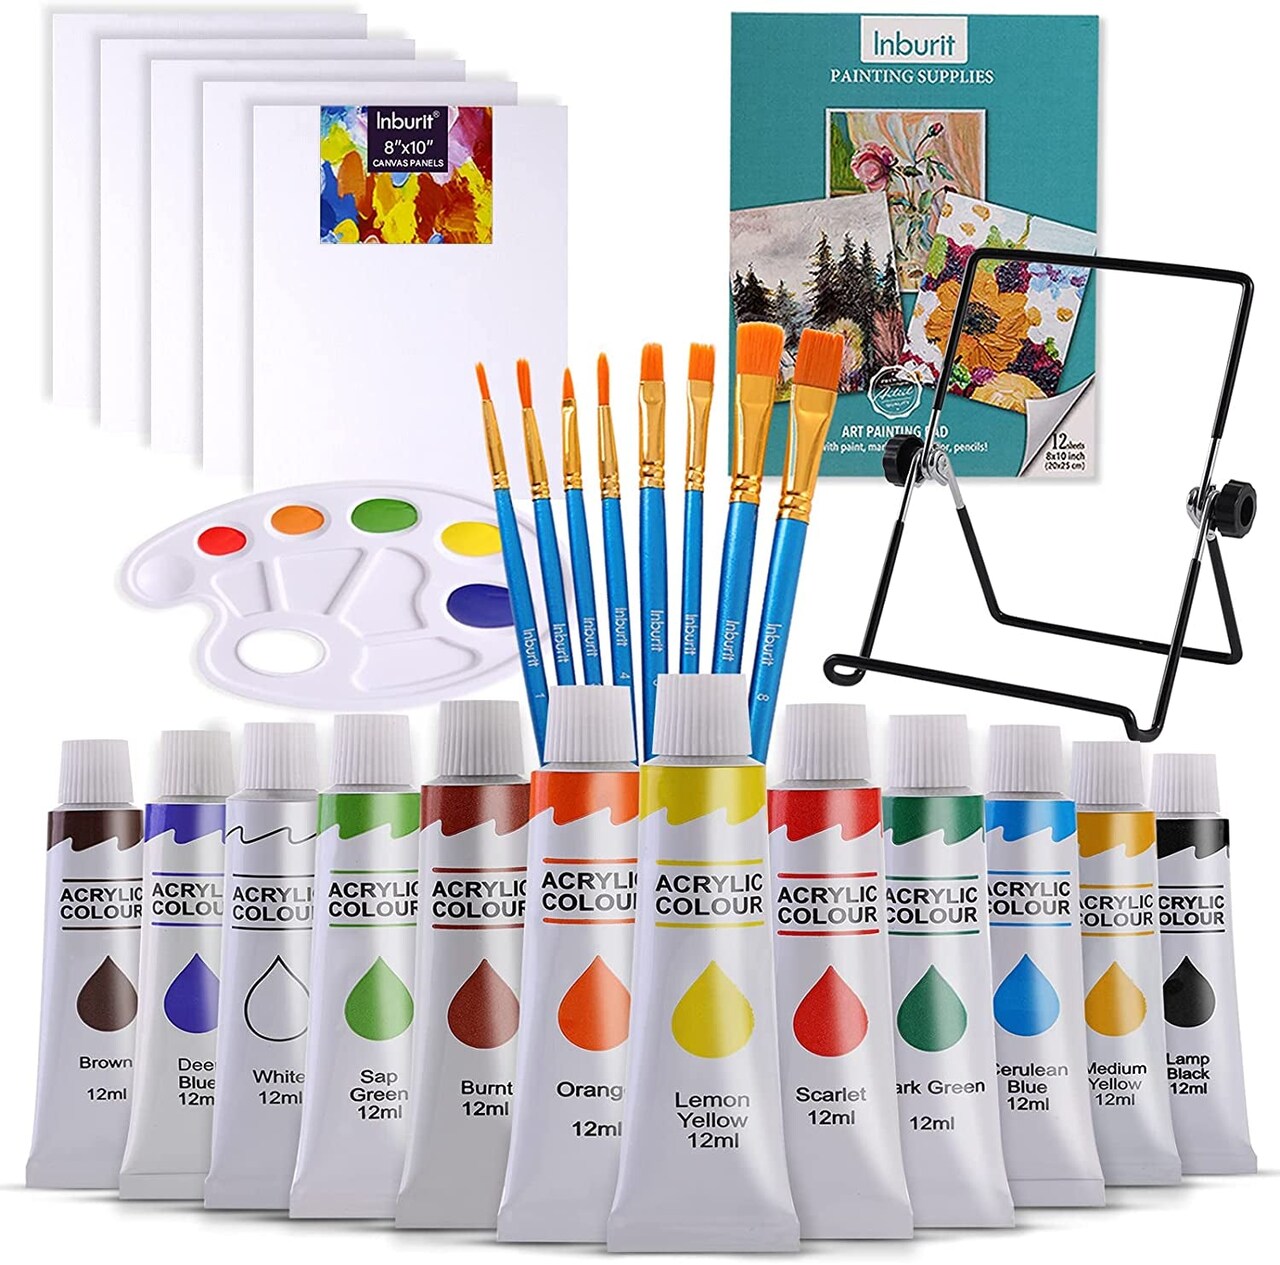 Art Paint Set for Kids, Painting Supplies Kit with 5 Canvas Panels, 8  Brushes, 12 Acrylic Paints, Multi-Function Table Easel, Etc, Premium Acrylic  Paint Set for Students, Kids and Beginner.